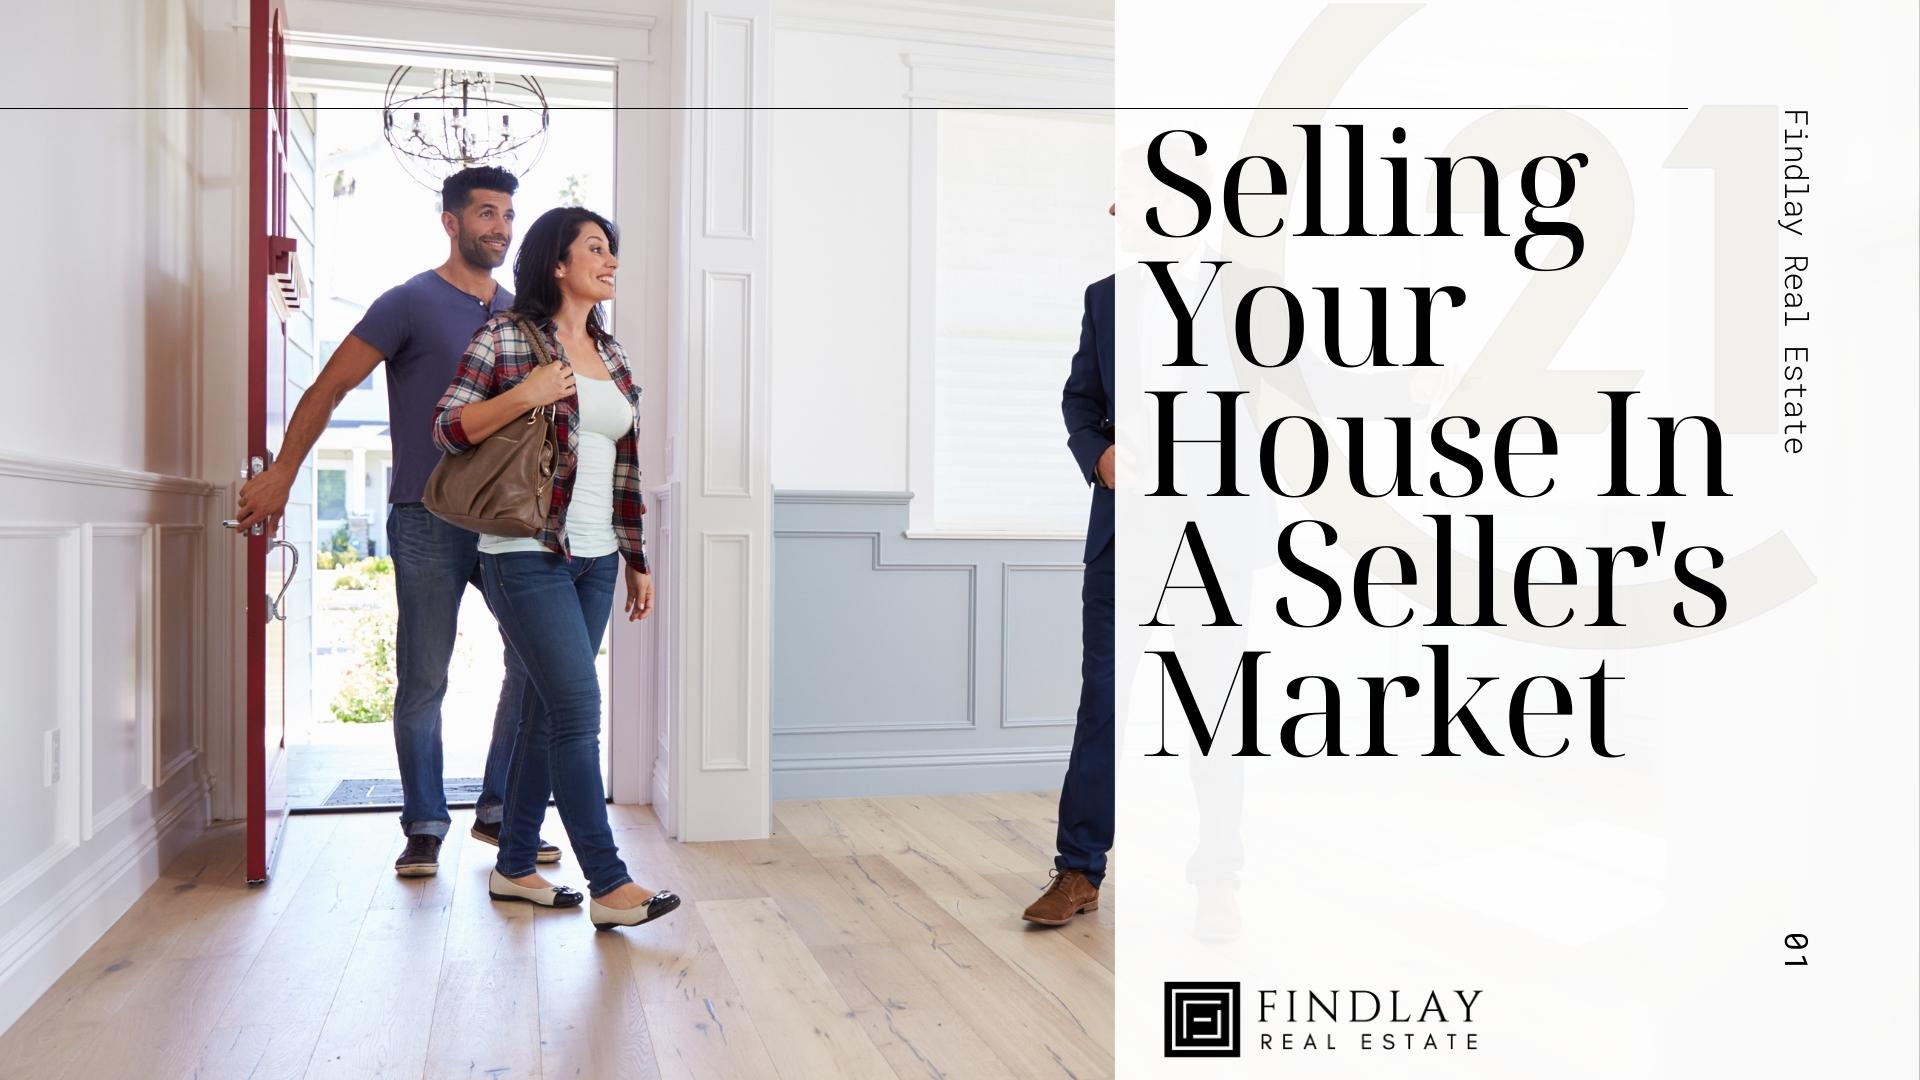 Selling Your House In A Seller's Market - FINDLAY REAL ESTATE